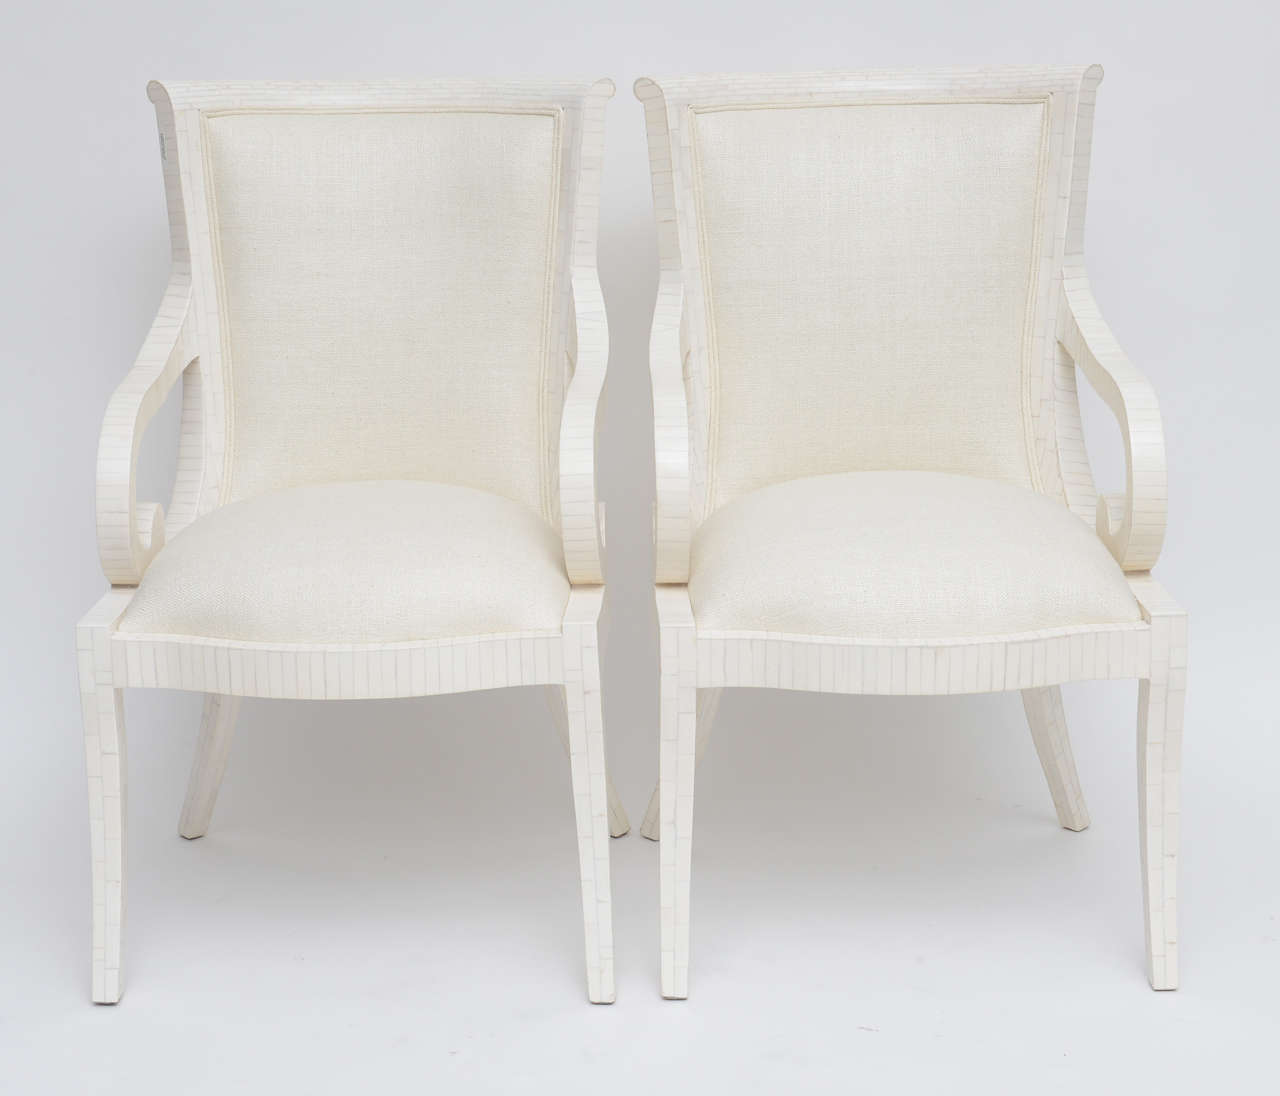 Immaculate, professionally restored pair of tessellated bone armchairs by Enrique Garces, upholstered in a soft cream silk. Please note that chairs are priced individually, not as a pair.